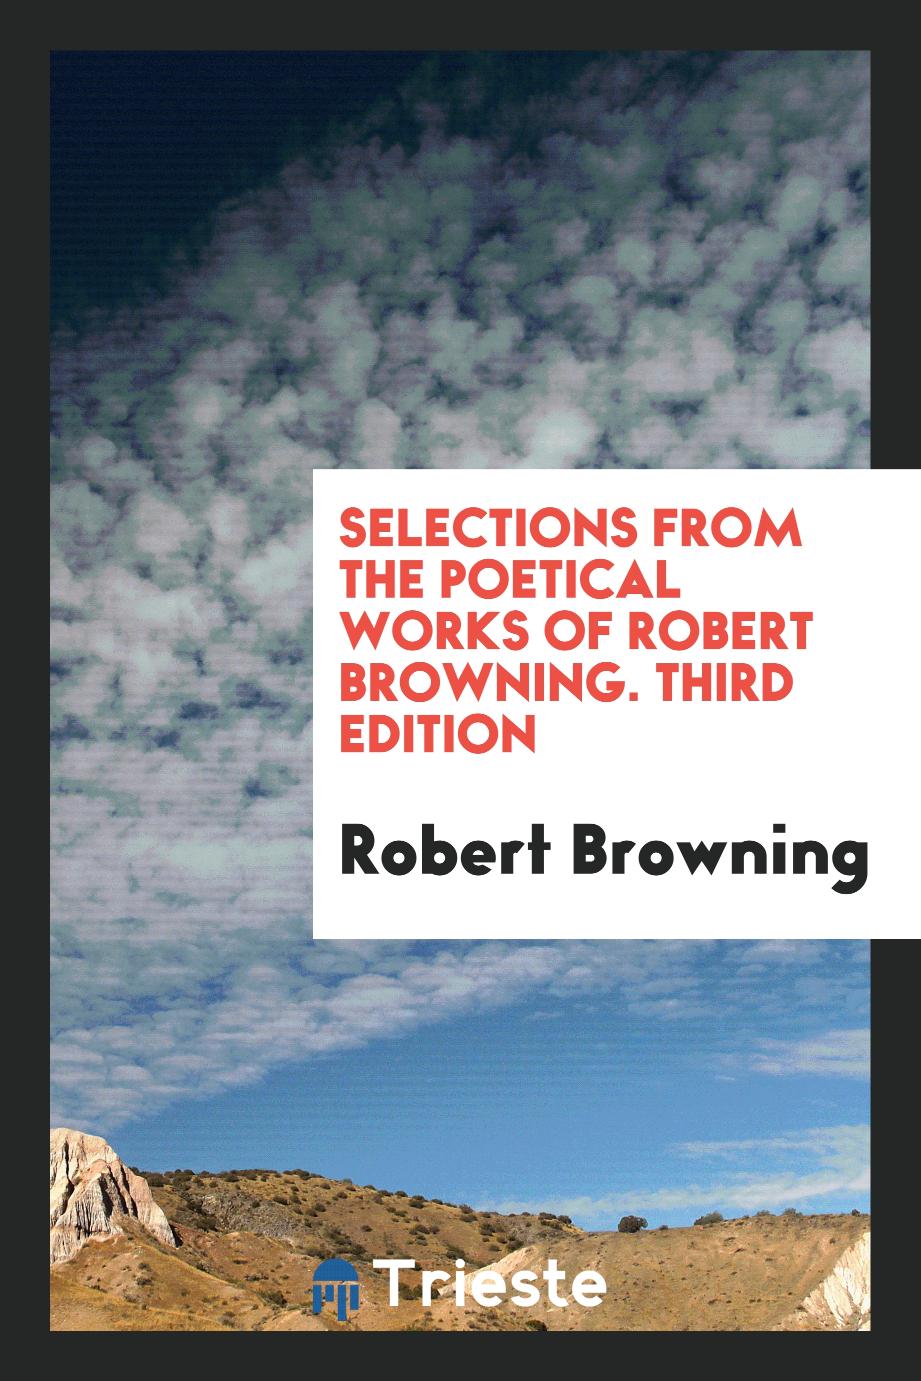 Selections from the Poetical Works of Robert Browning. Third Edition